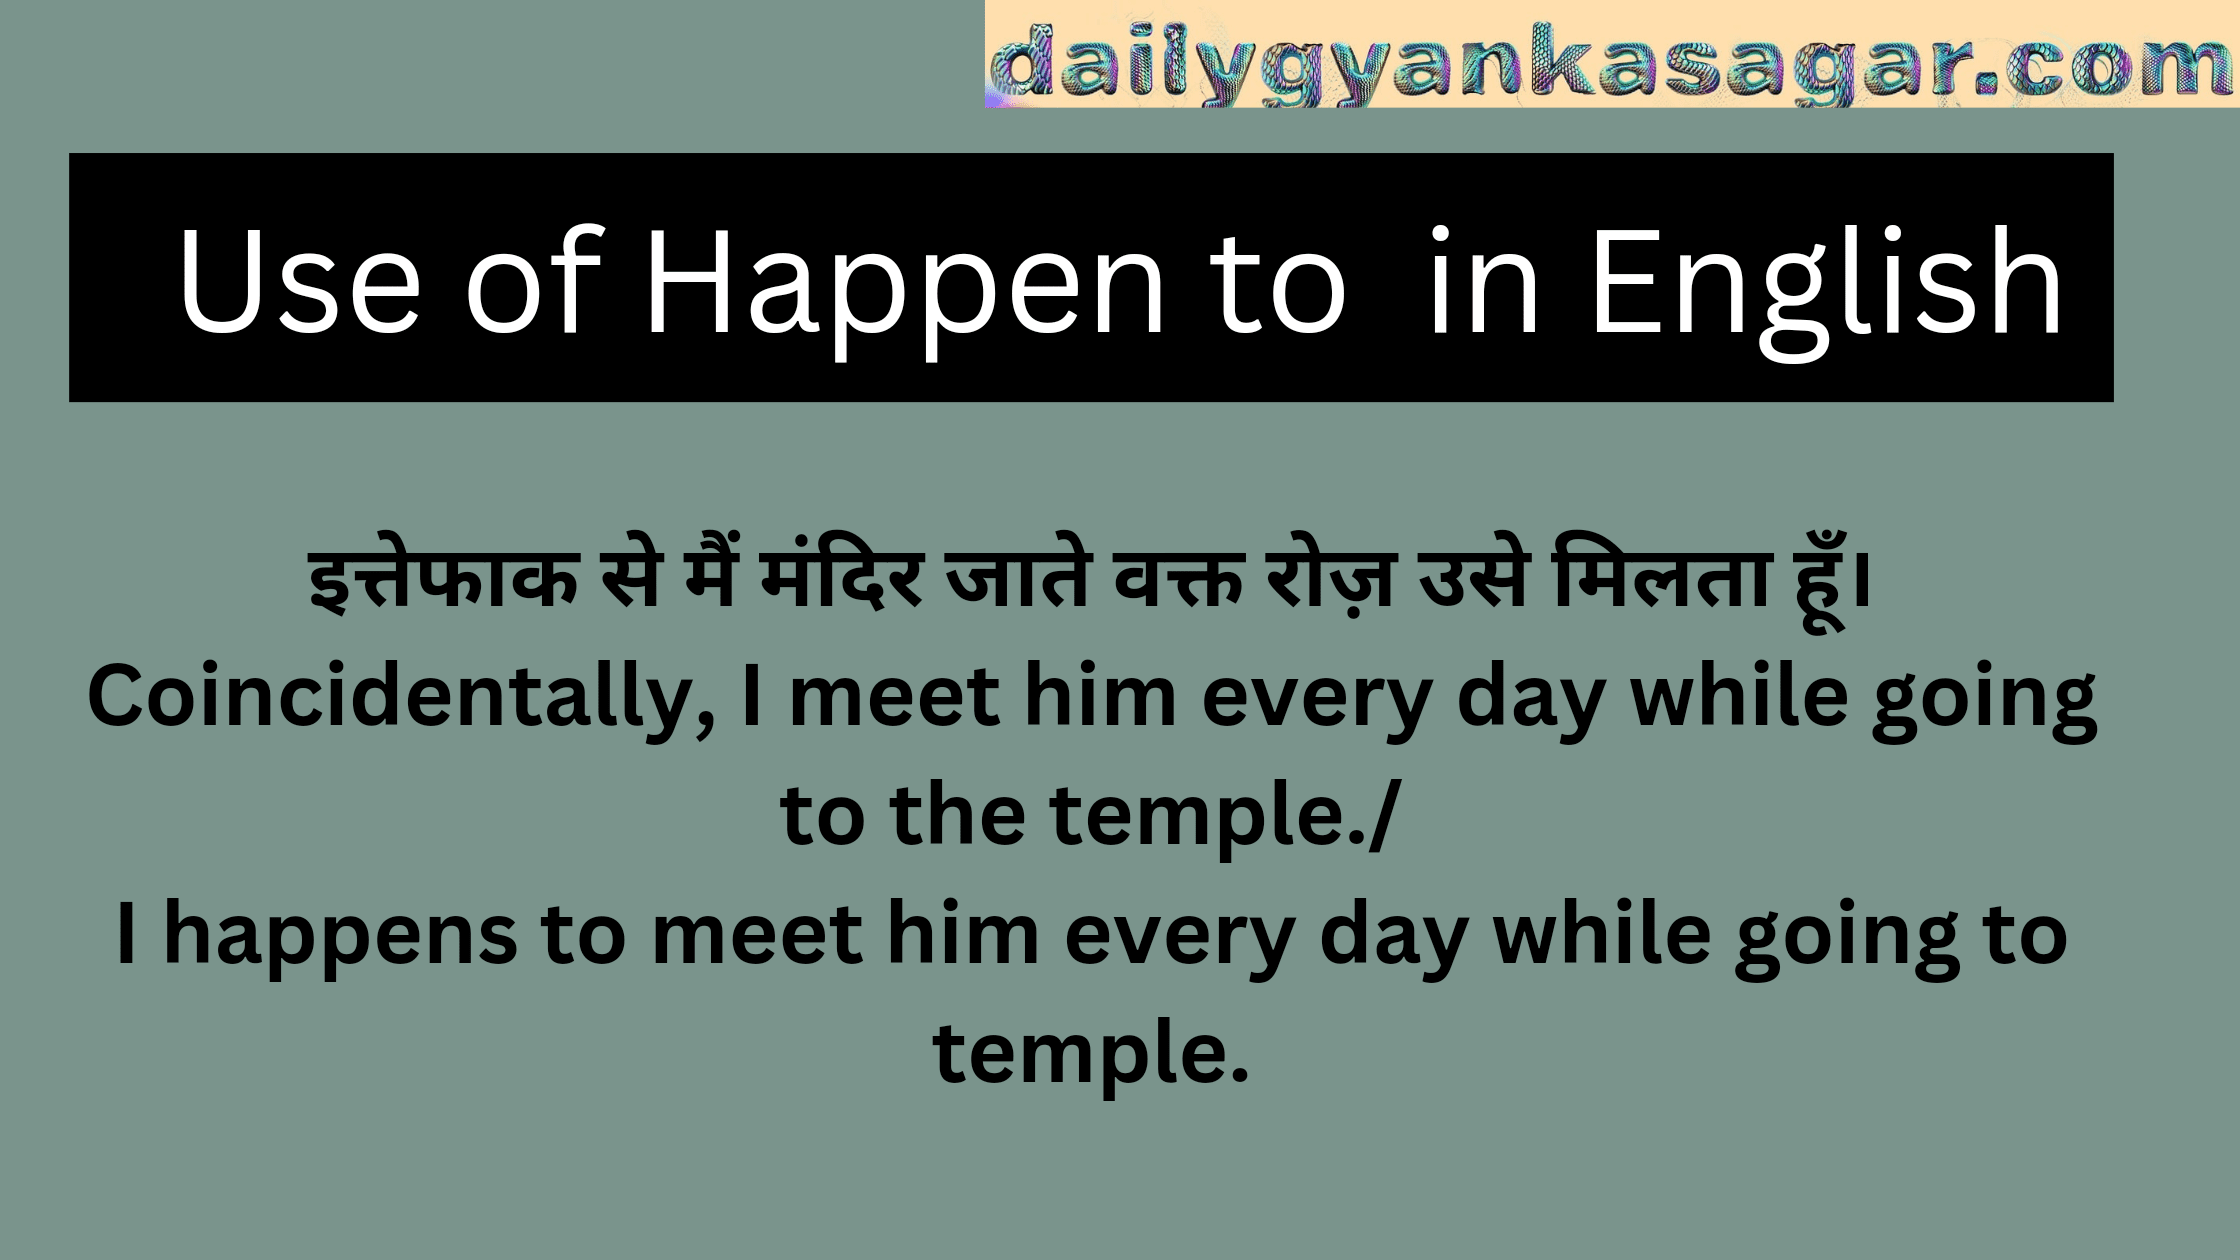 Use of happen to in English